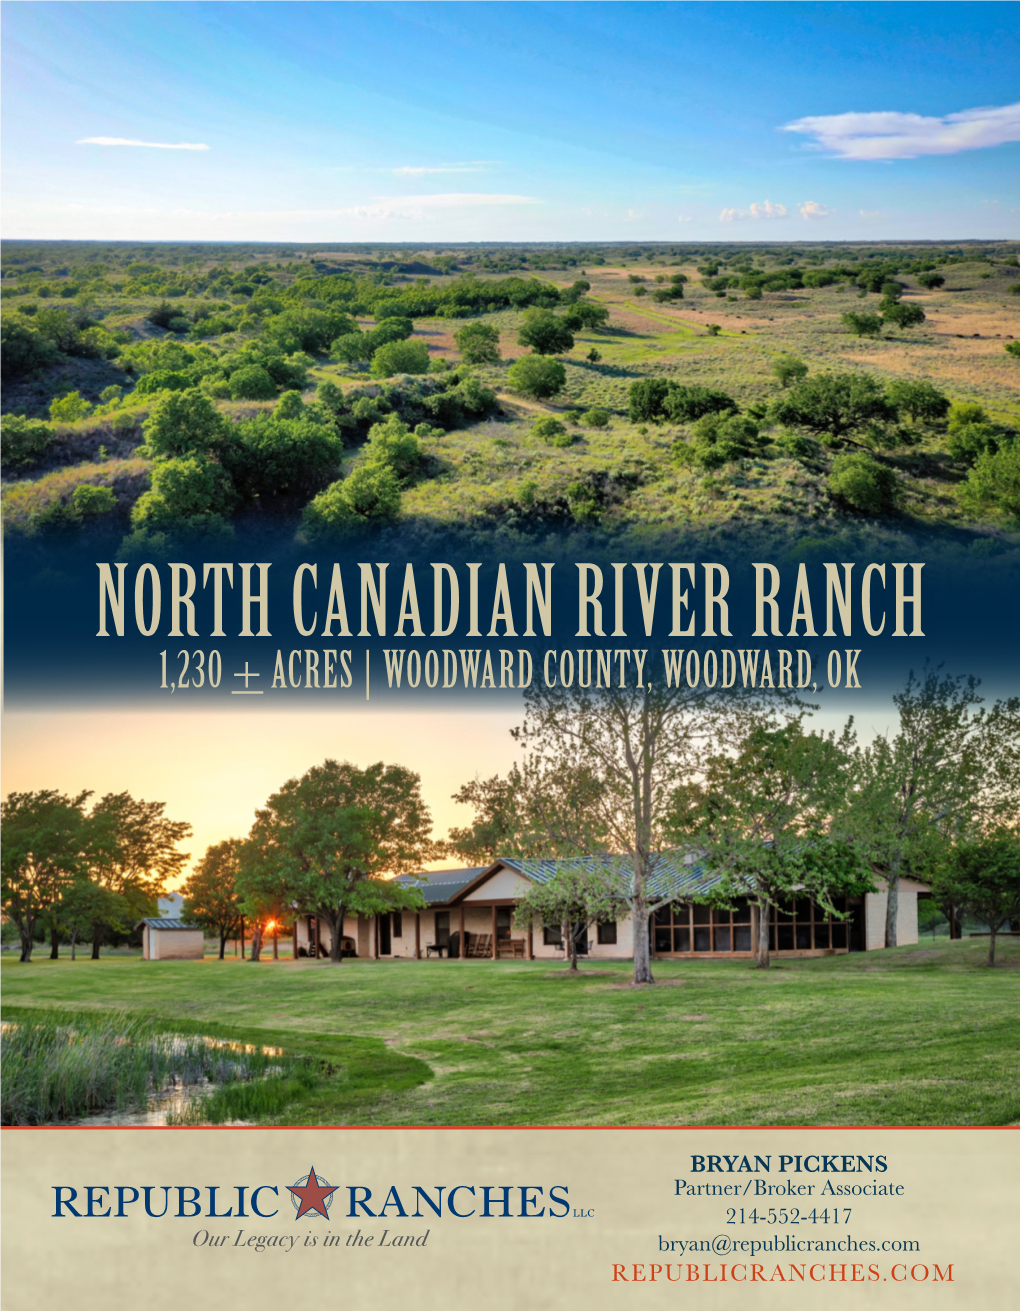 North Canadian River Ranch 1,230 + Acres | Woodward County, Woodward, Ok